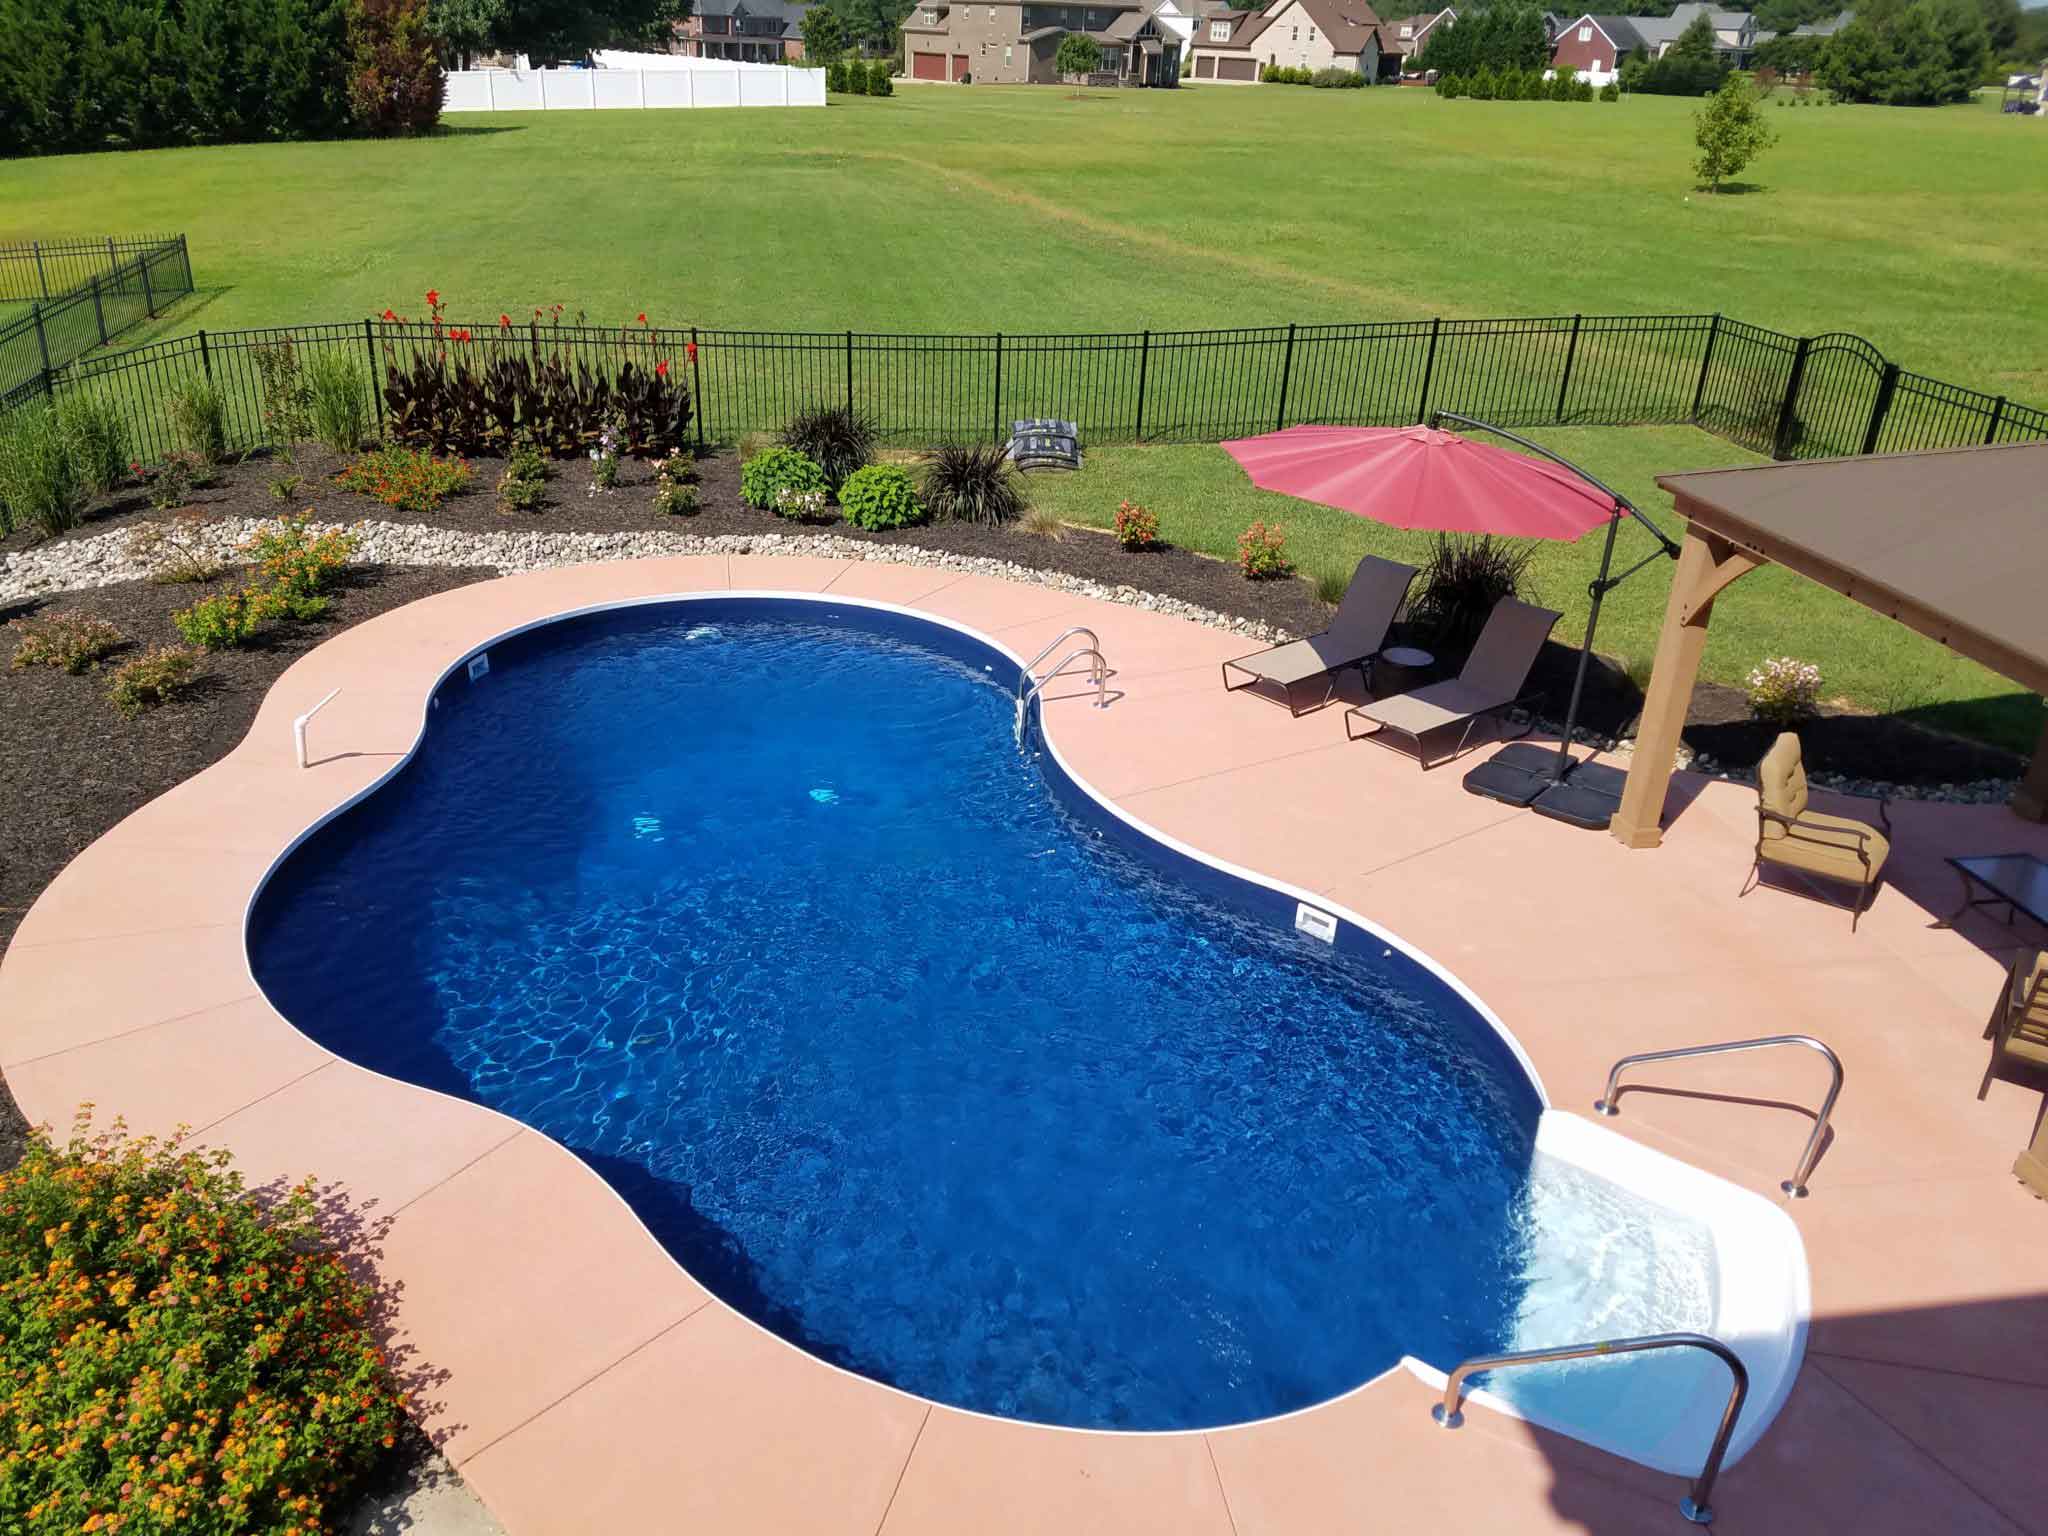 Planning Your Pool - Rising Sun Pools & Spas